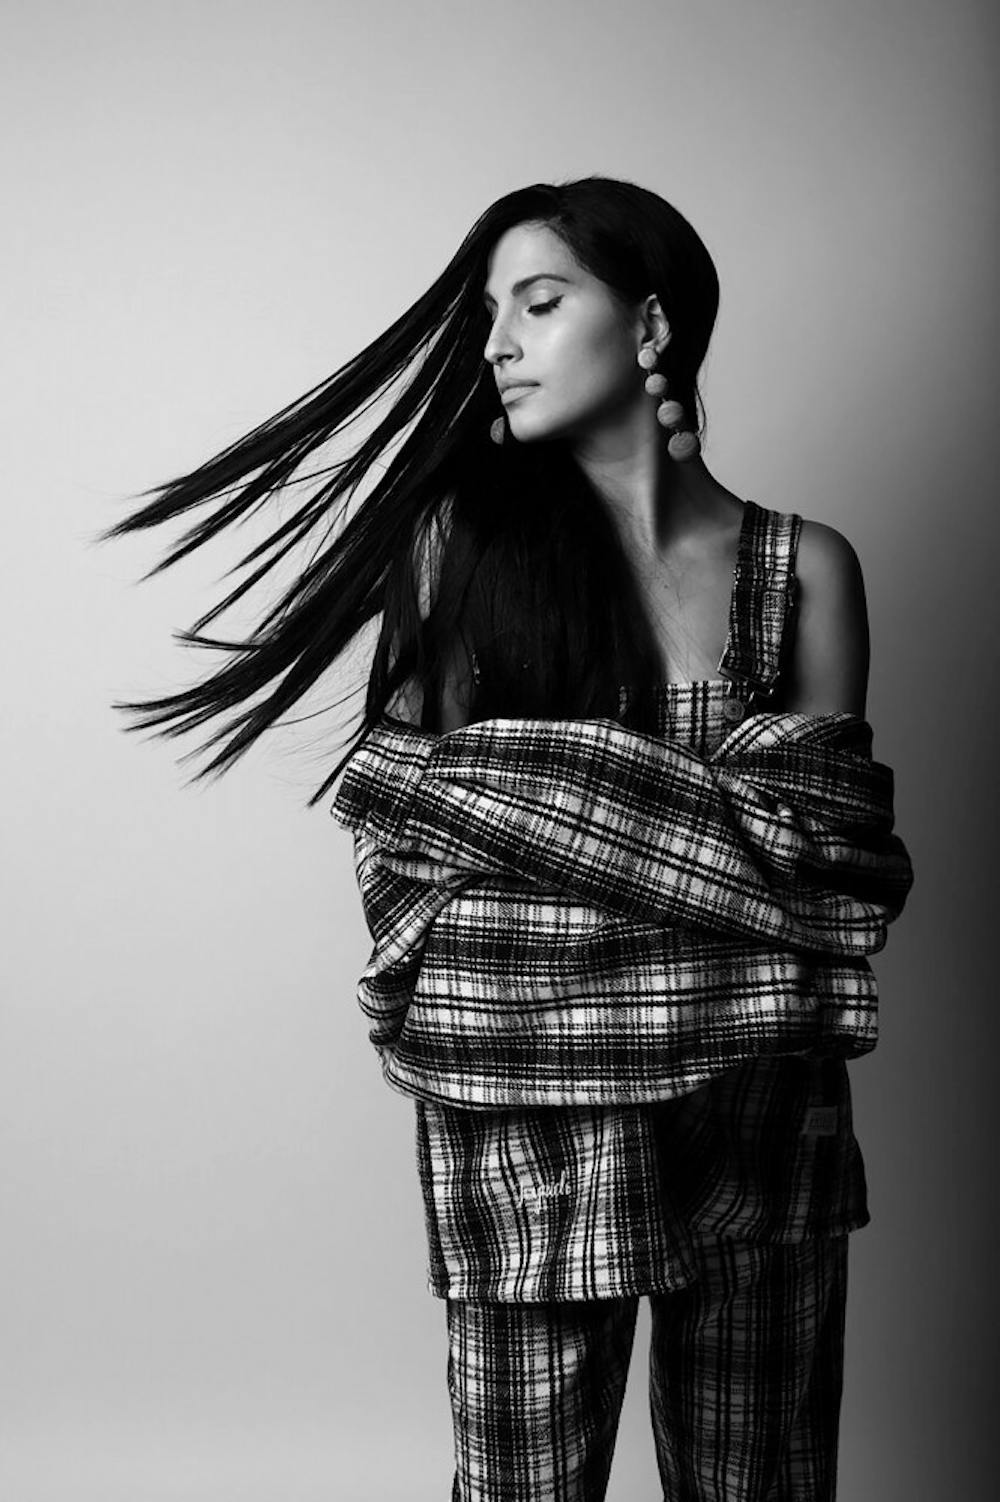 <p>R&B singer Snoh Aalegra opens for Daniel Caesar at Danforth Music Hall in Toronto for five straight nights starting Dec. 16. Aalegra talked to <em>The Spectrum </em>about these shows and the vision behind new album "Feels."</p>